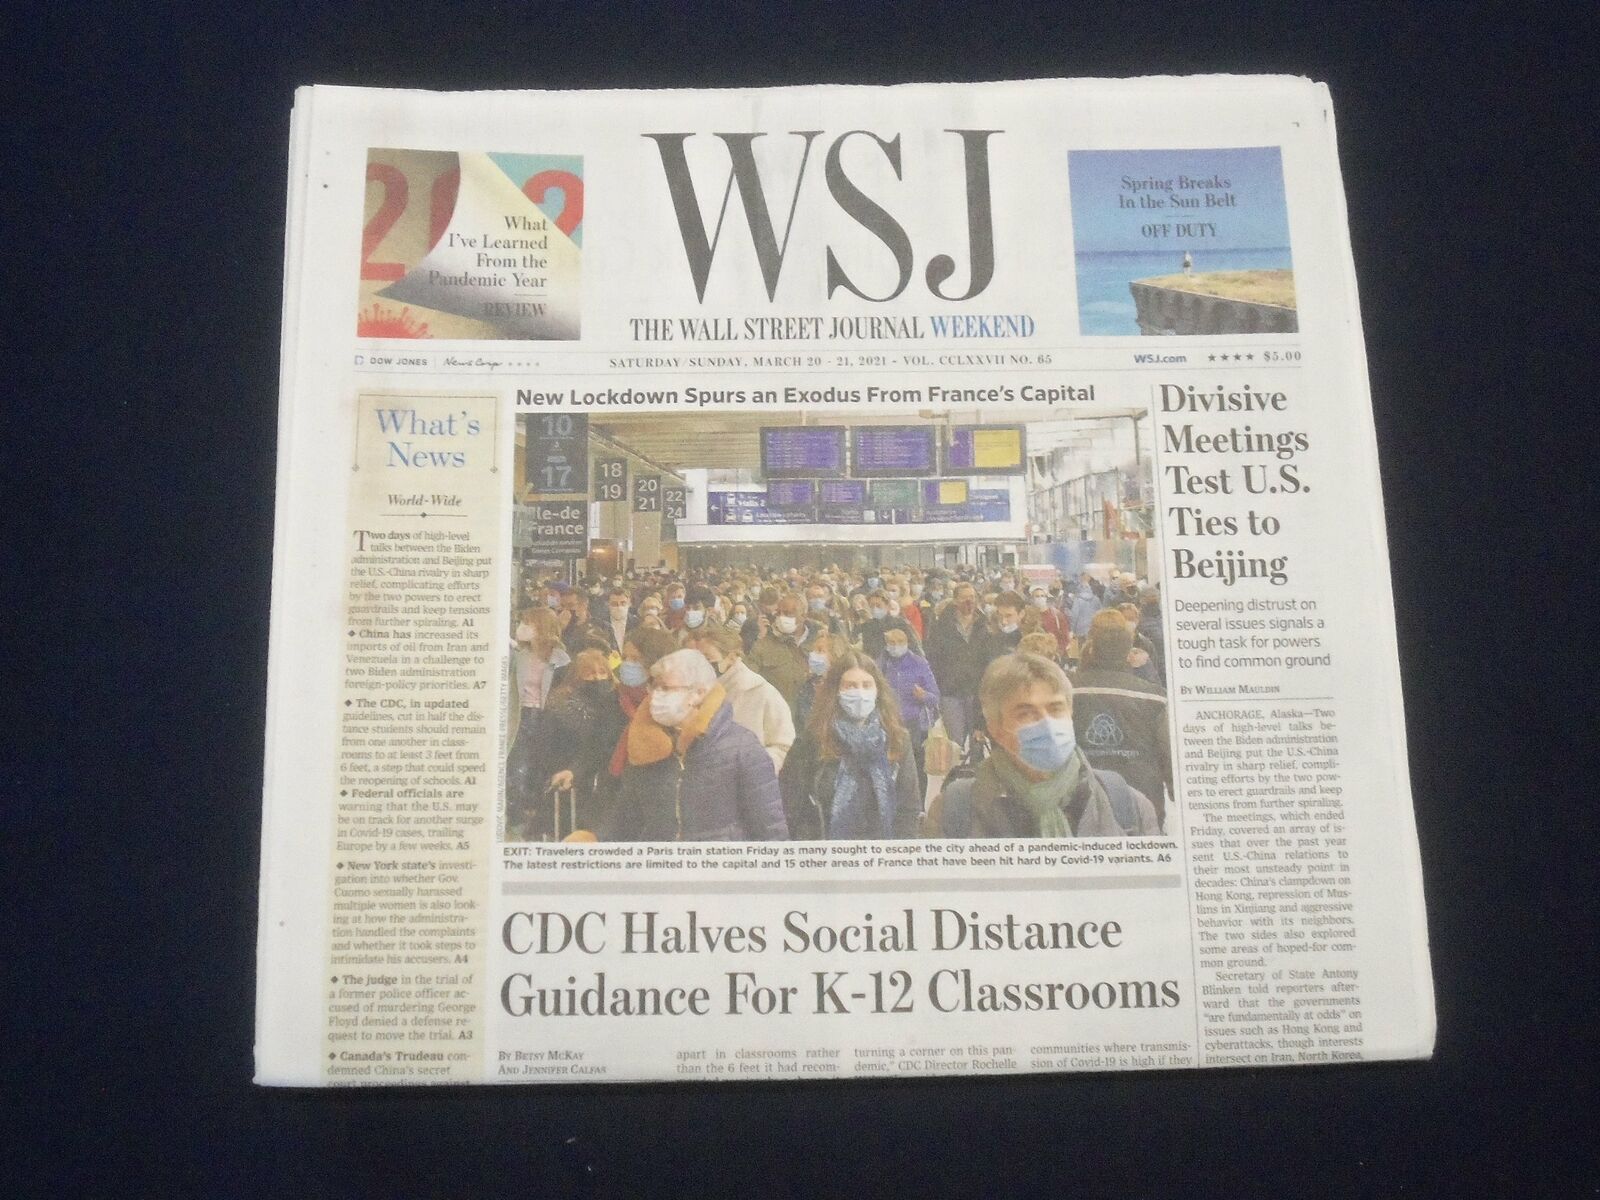 2021 MARCH 20-21 THE WALL STREET JOURNAL - DIVISIVE MEETINGS TEST U.S. & BEIJING